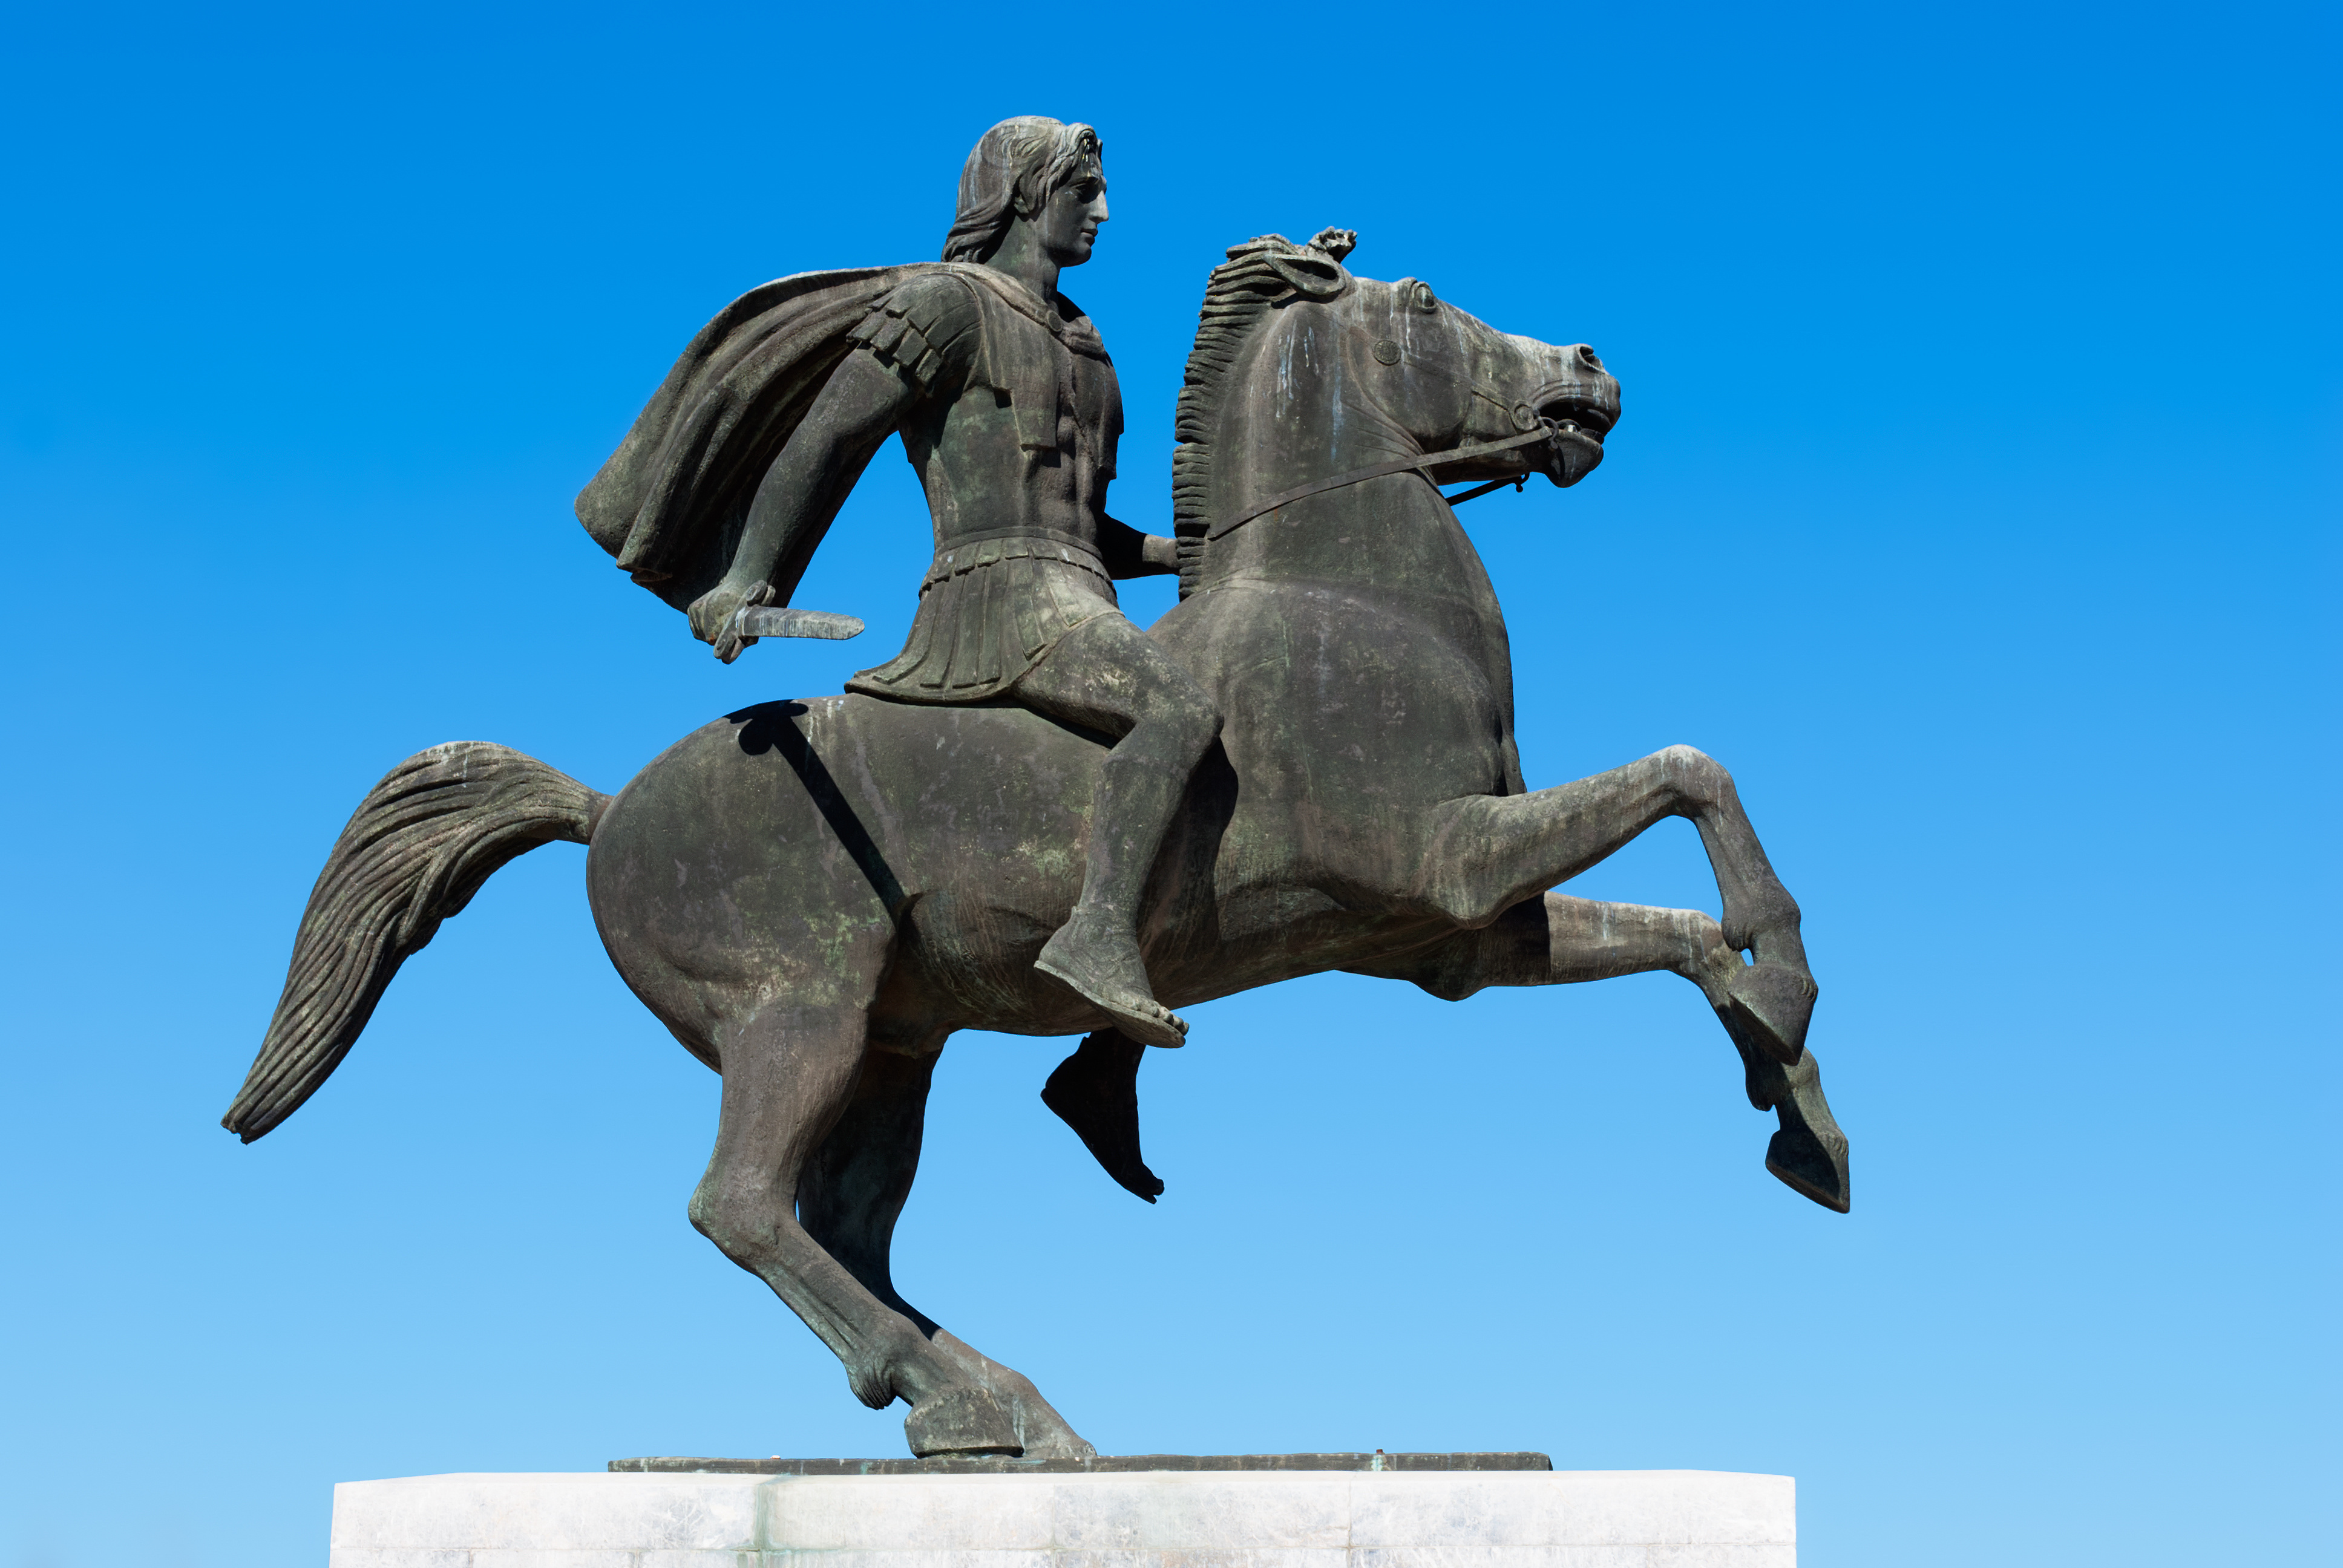 Statue of Alexander the Great at Thessaloniki, Greece. Image courtesy of Adobe Stock.